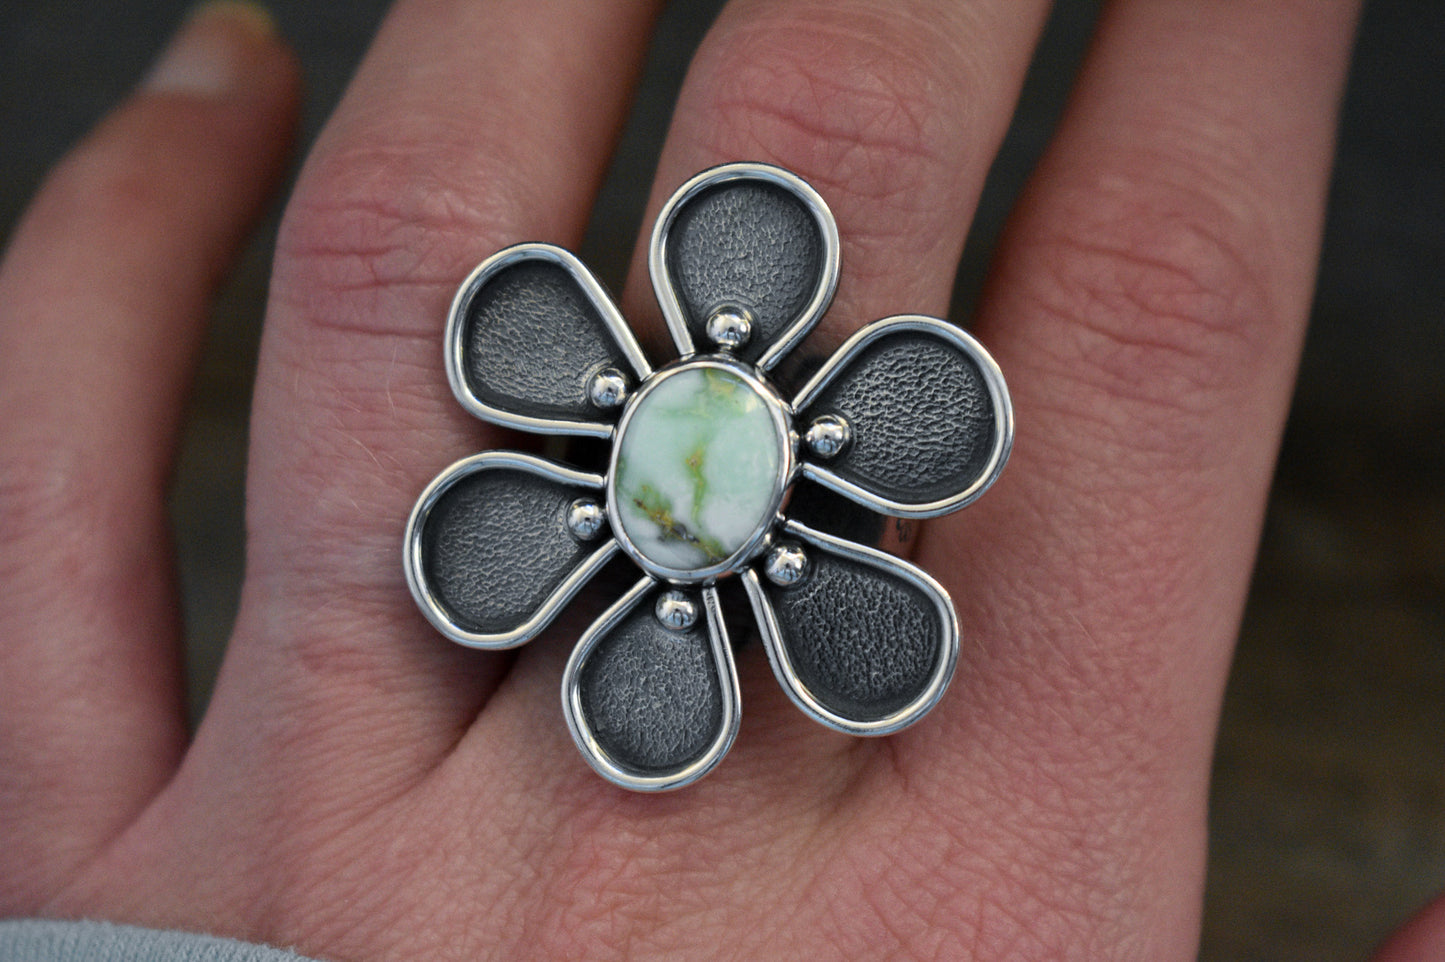 FLORAL RING No. 1 SIZE 8.75